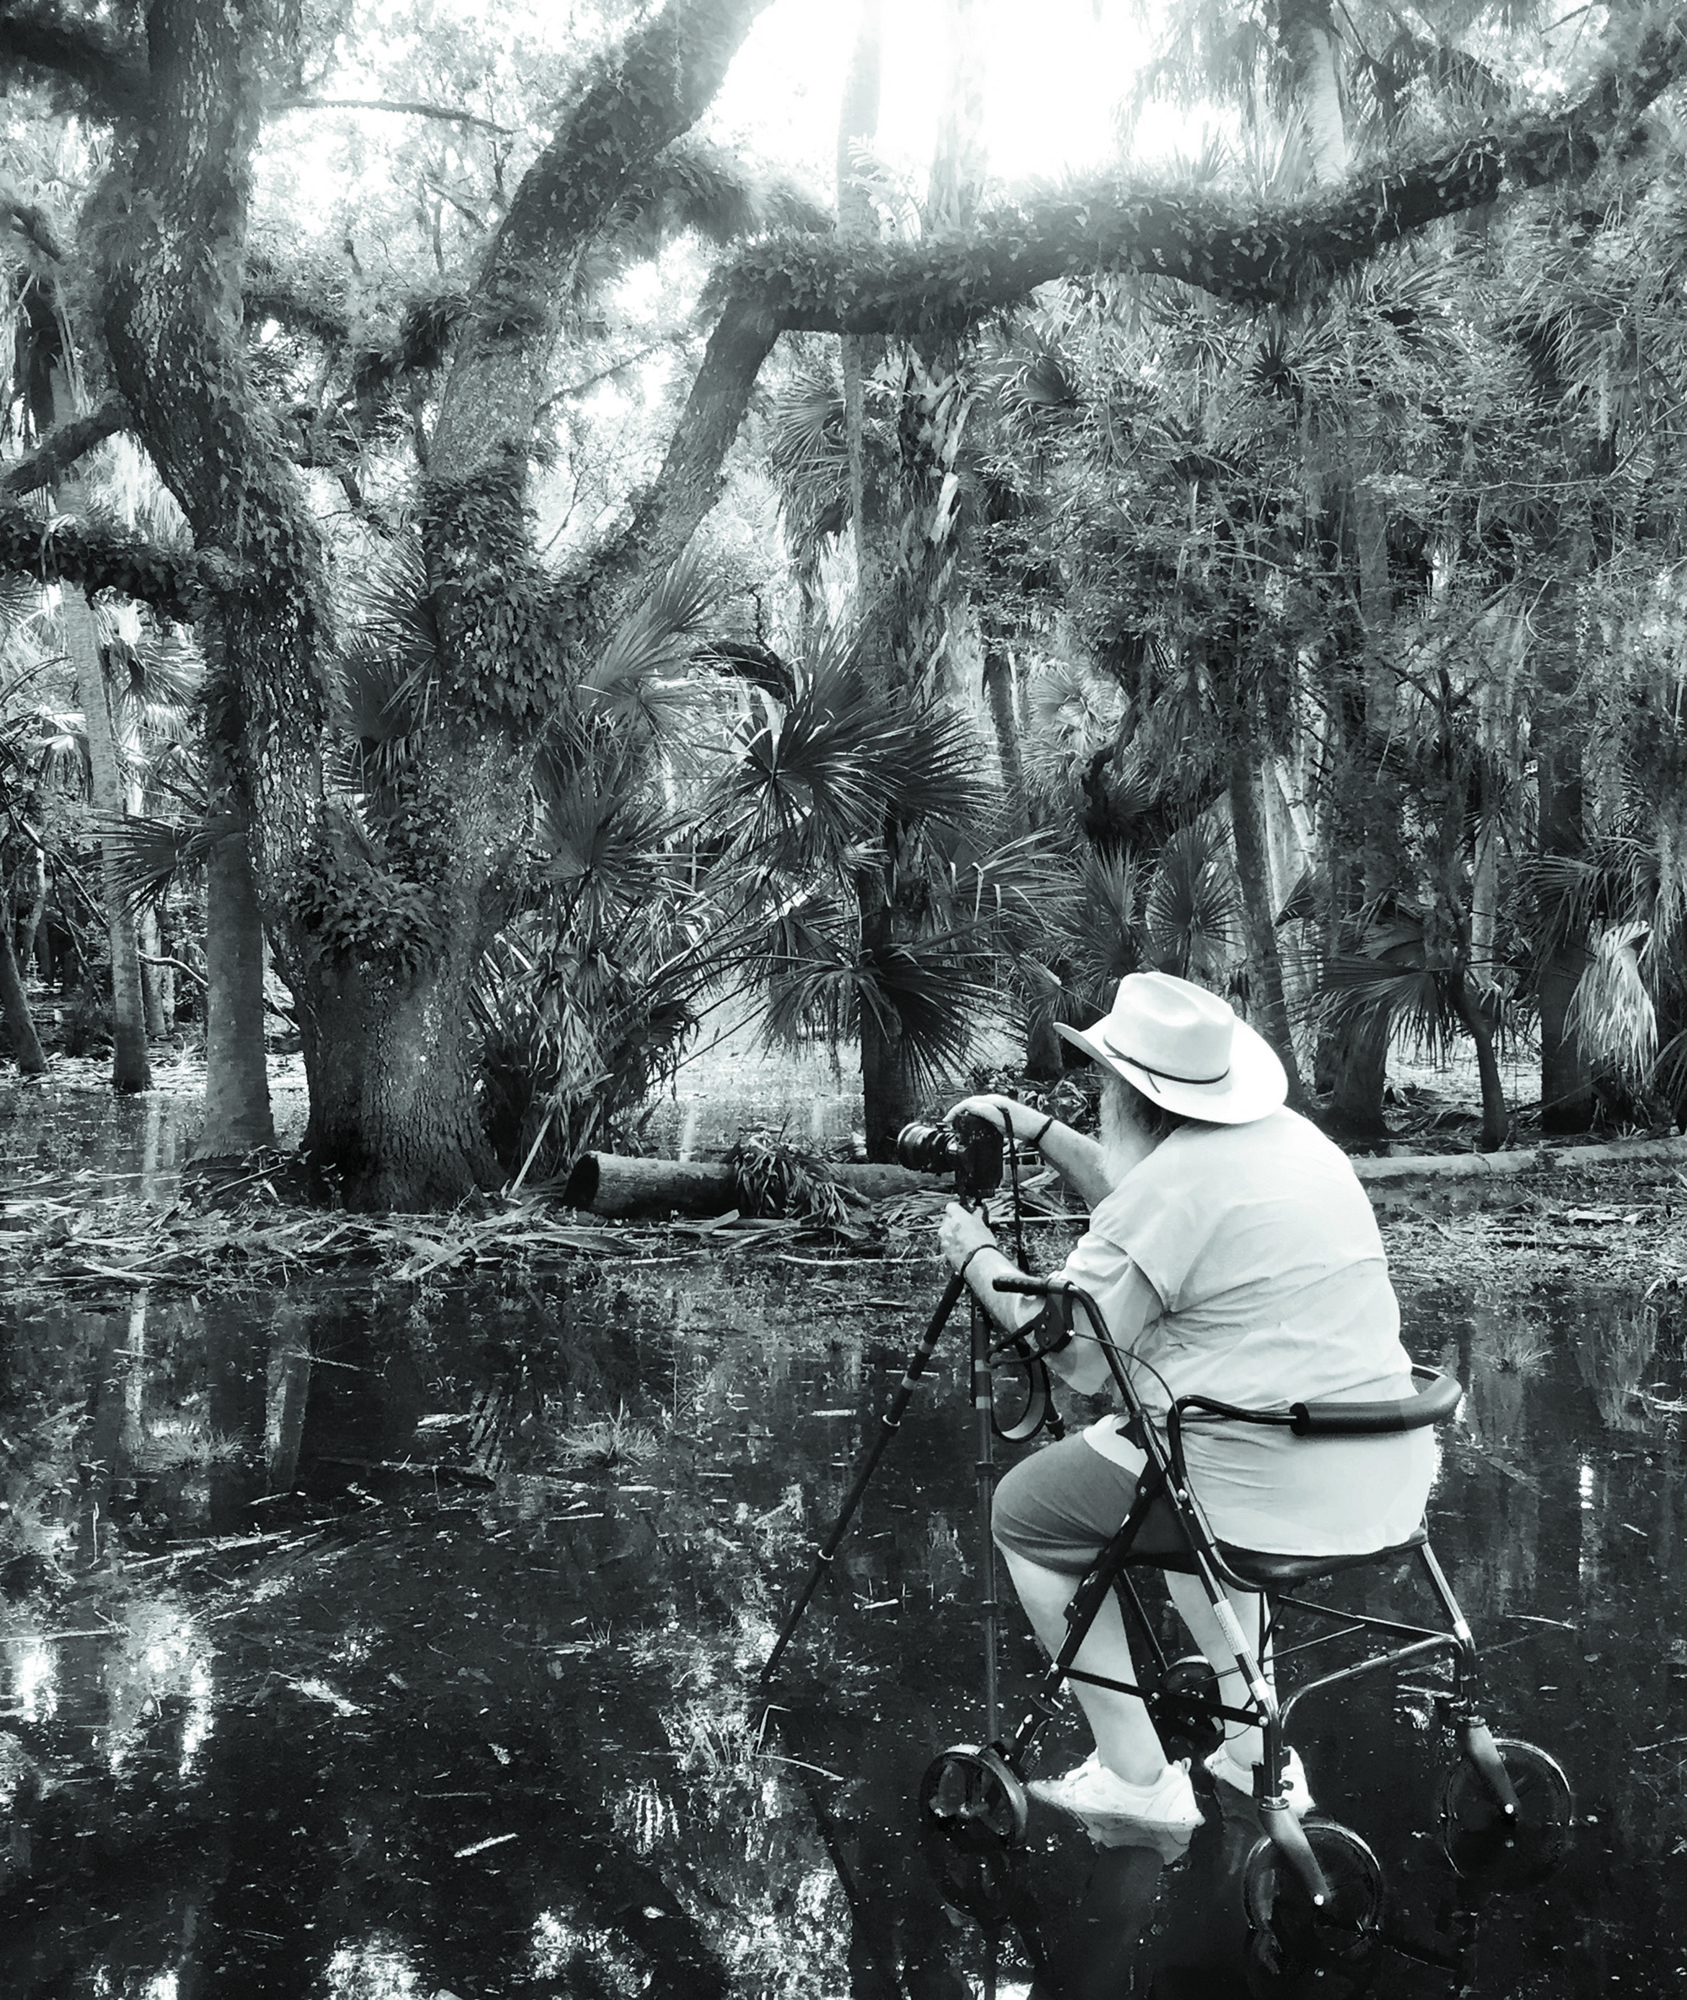 Clyde Butcher wades deep into the waters of Myakka River State Park to get his photos. Photo by Niki Butcher